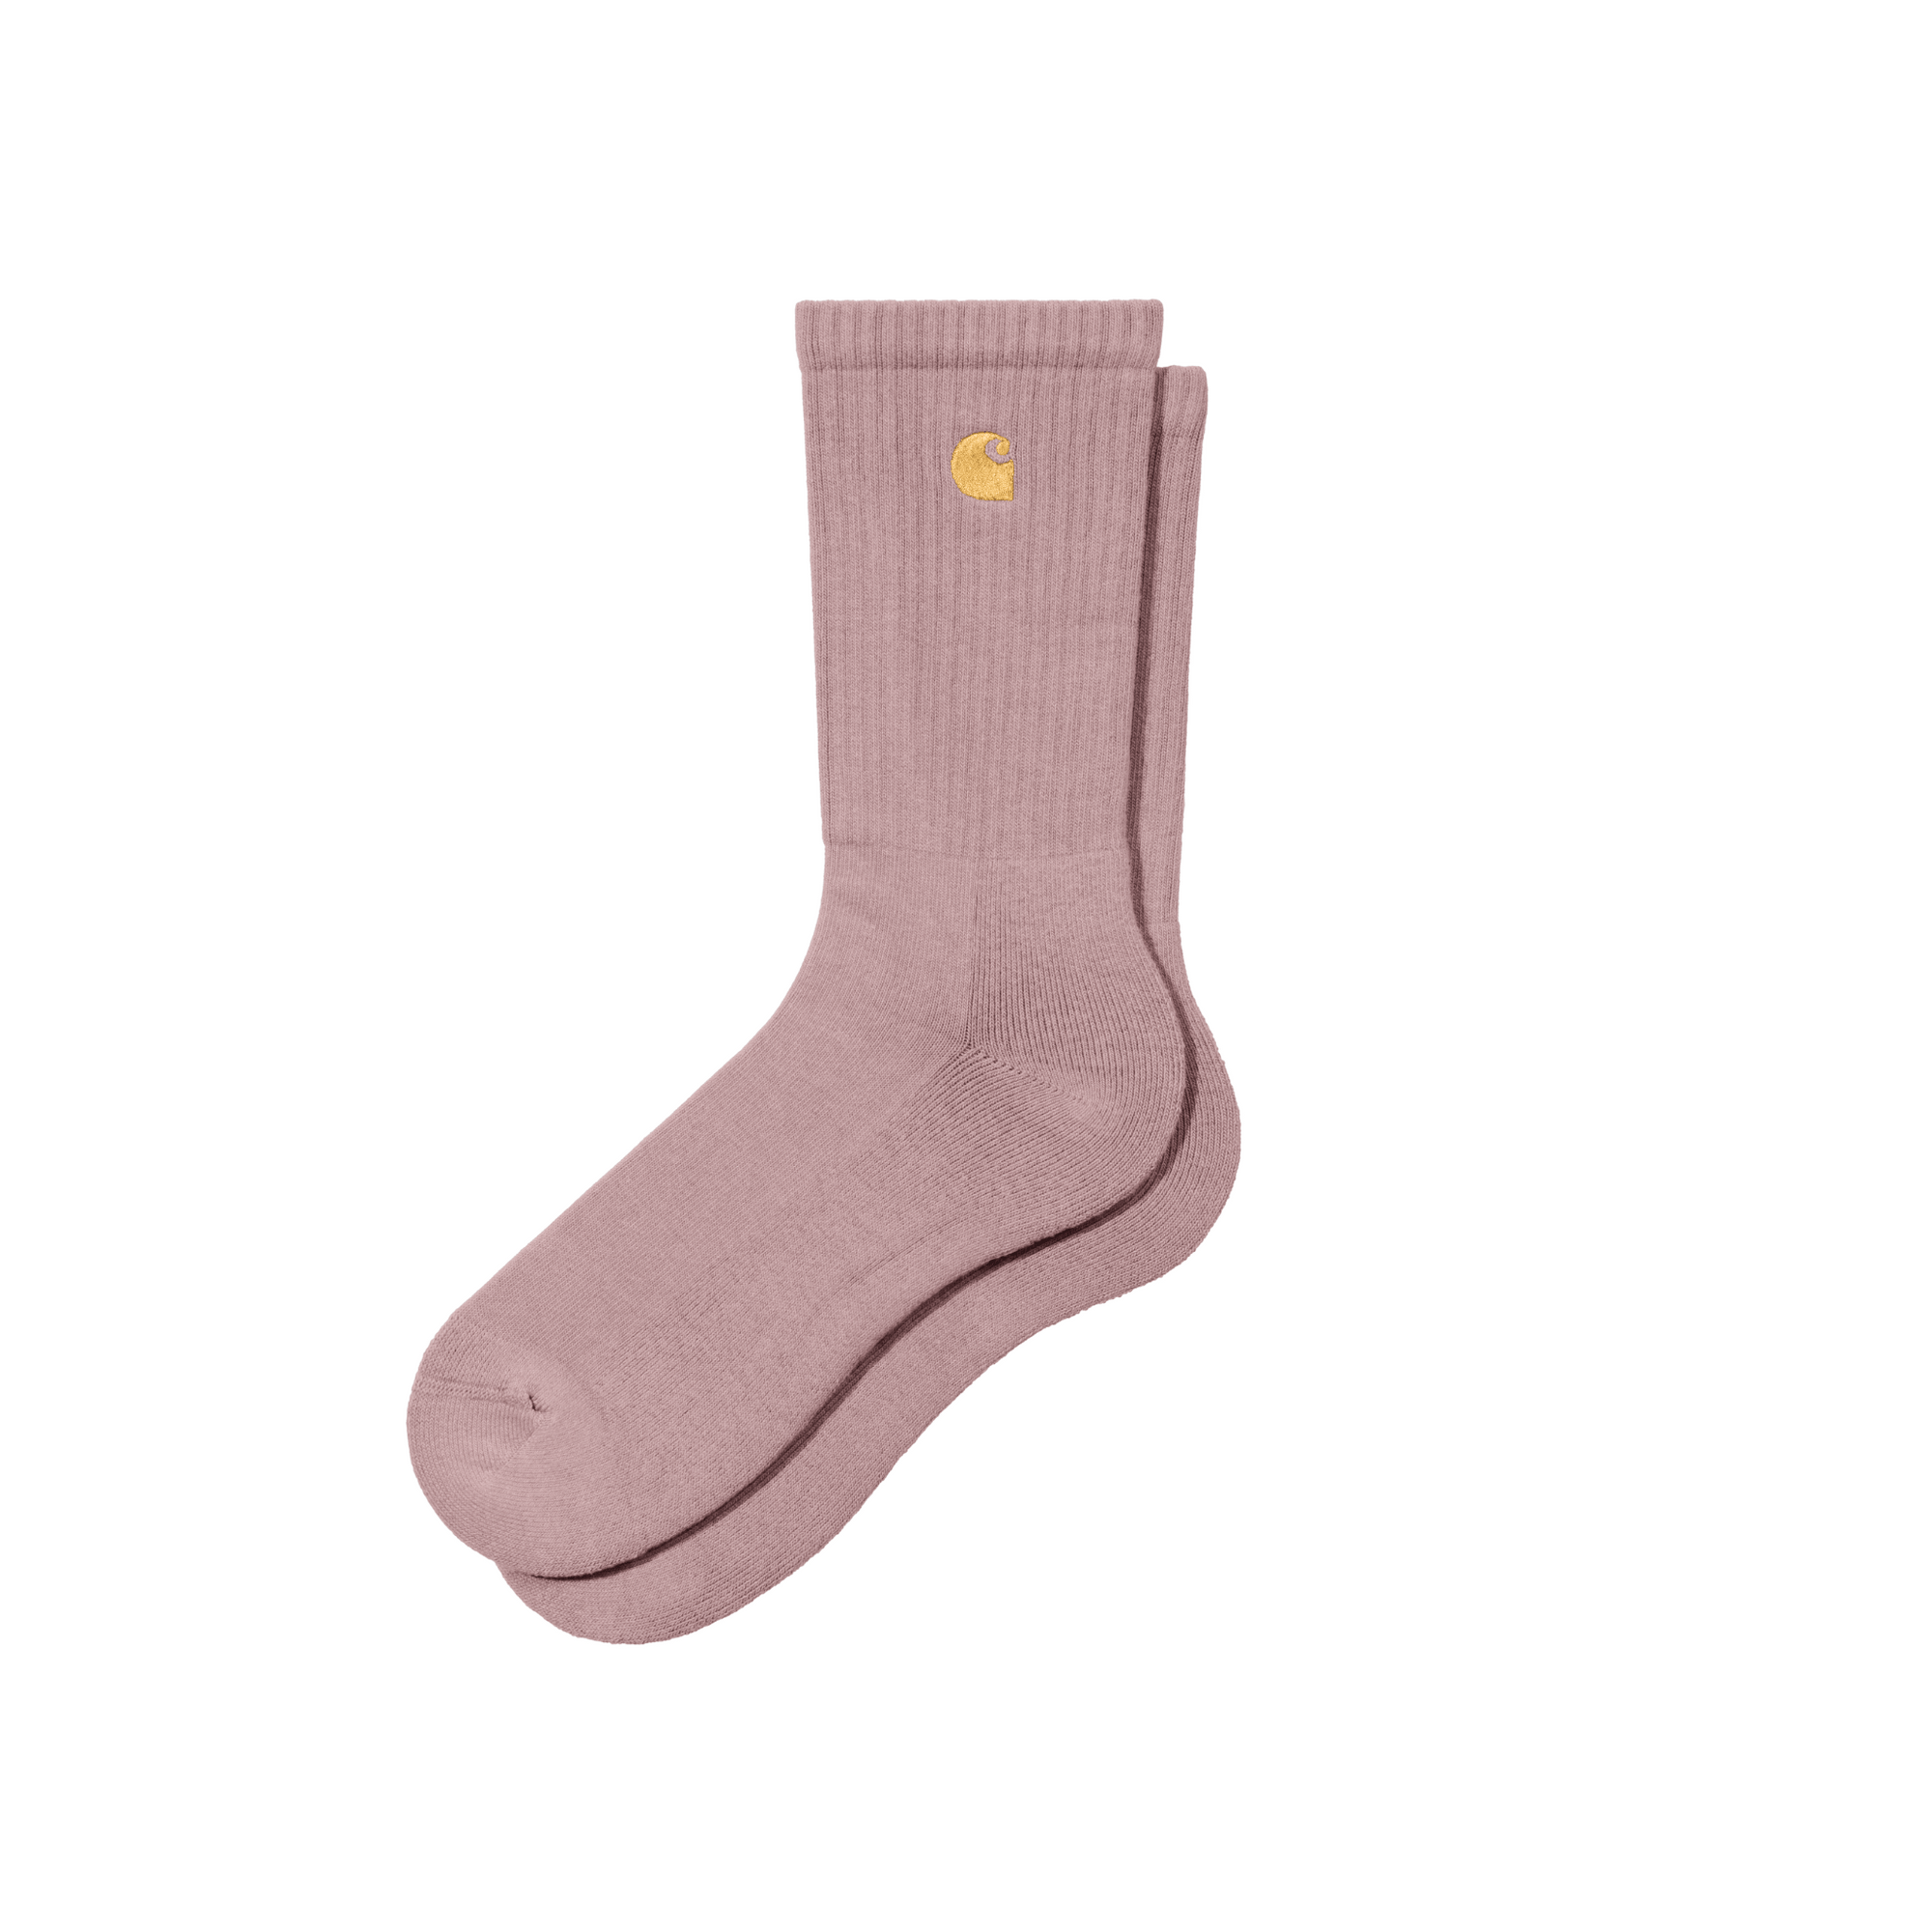 Carhartt WIP Chase Socks (glassy pink/gold) - Blue Mountain Store